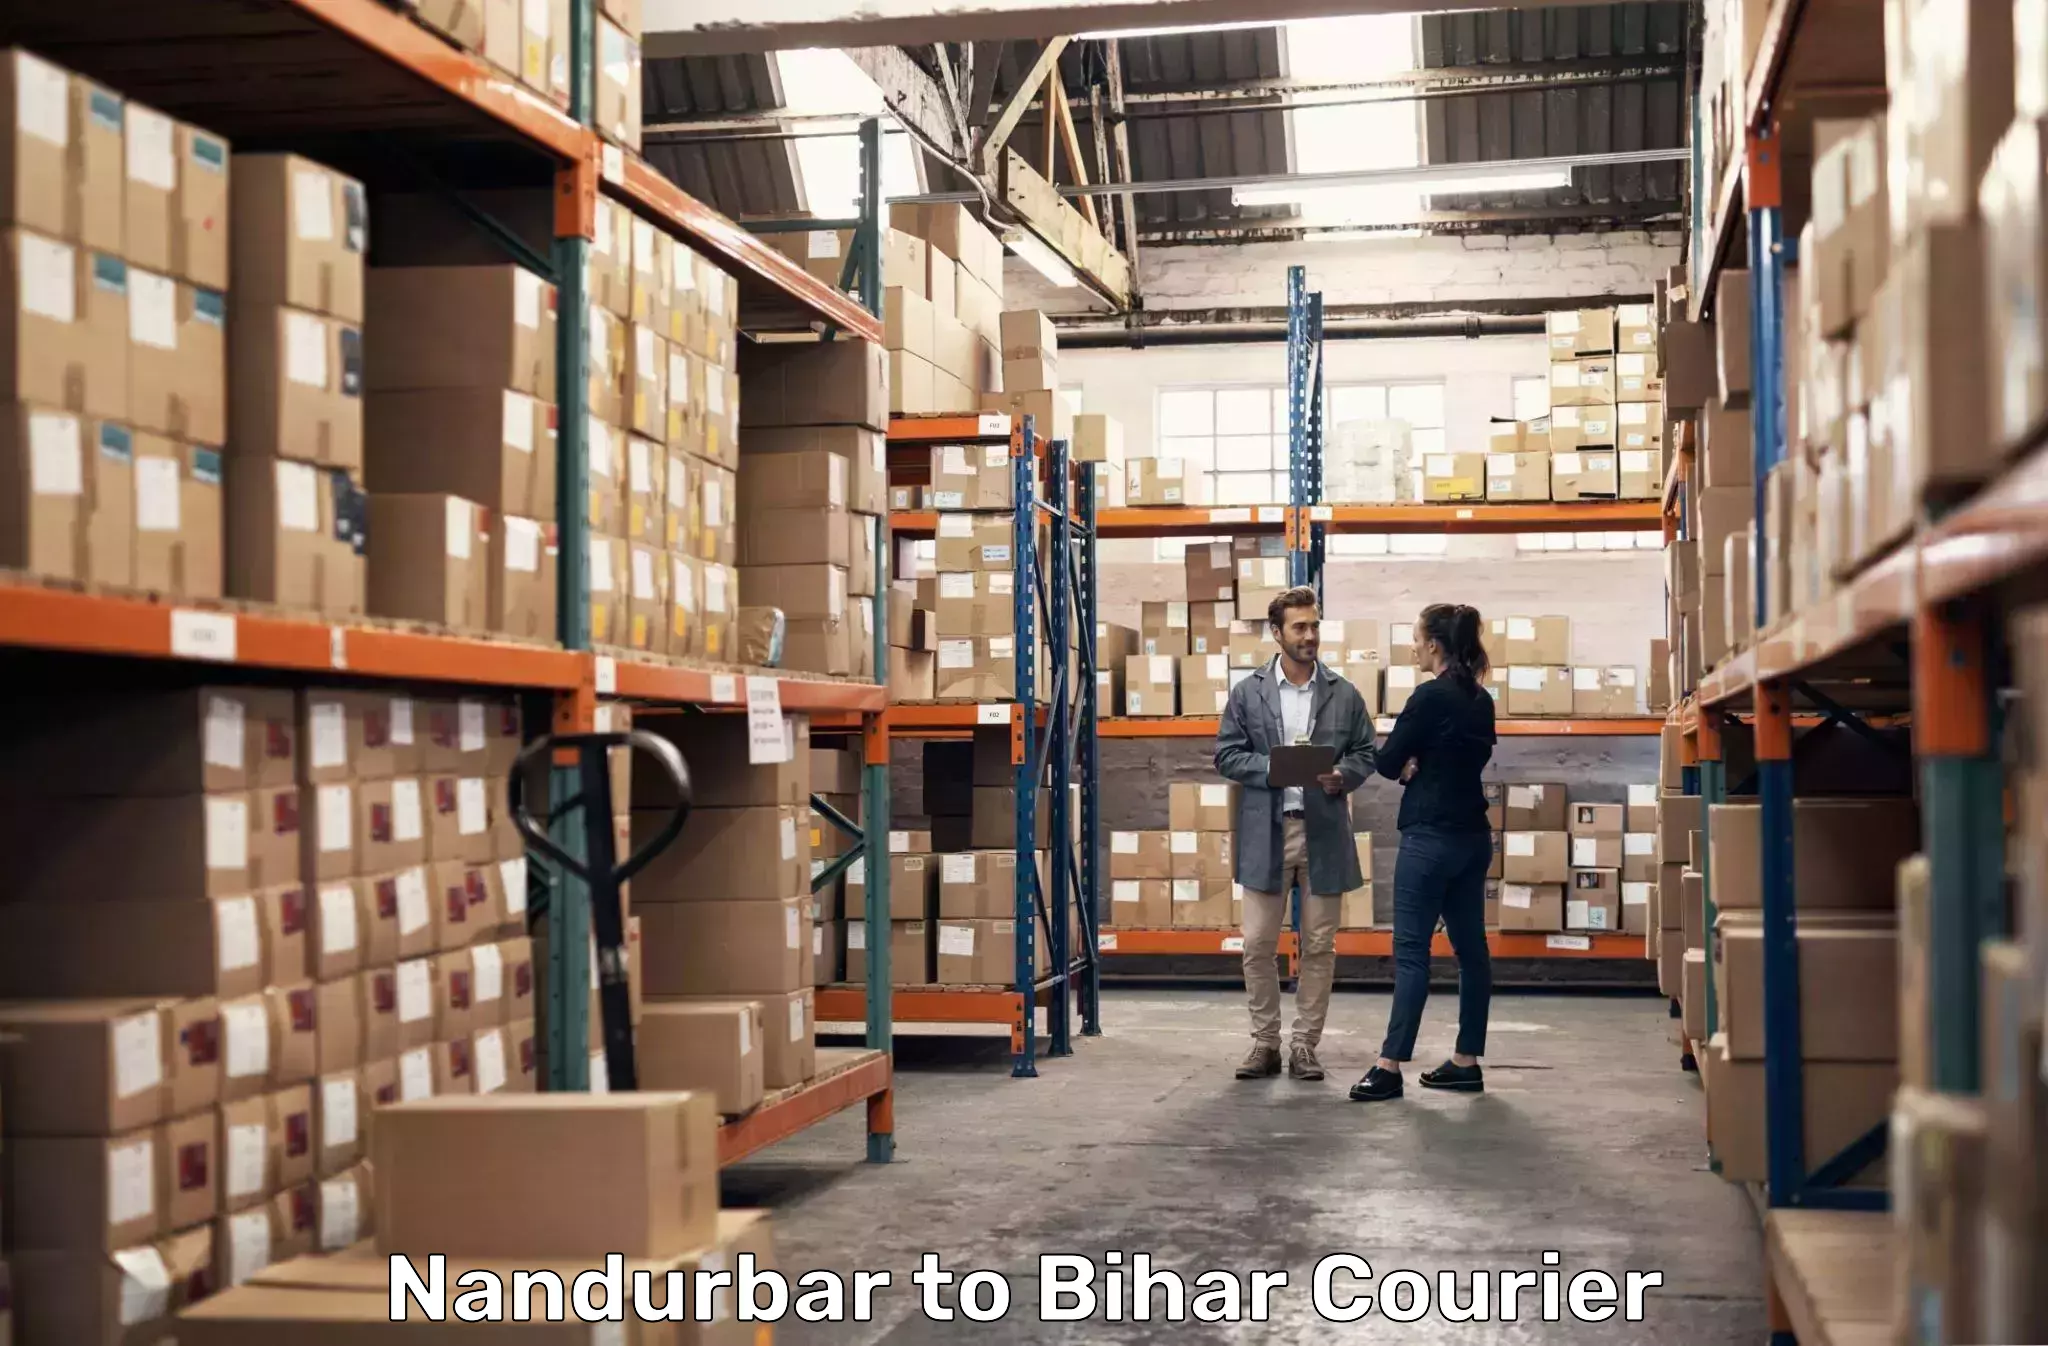 Next-day delivery options in Nandurbar to Sitamarhi